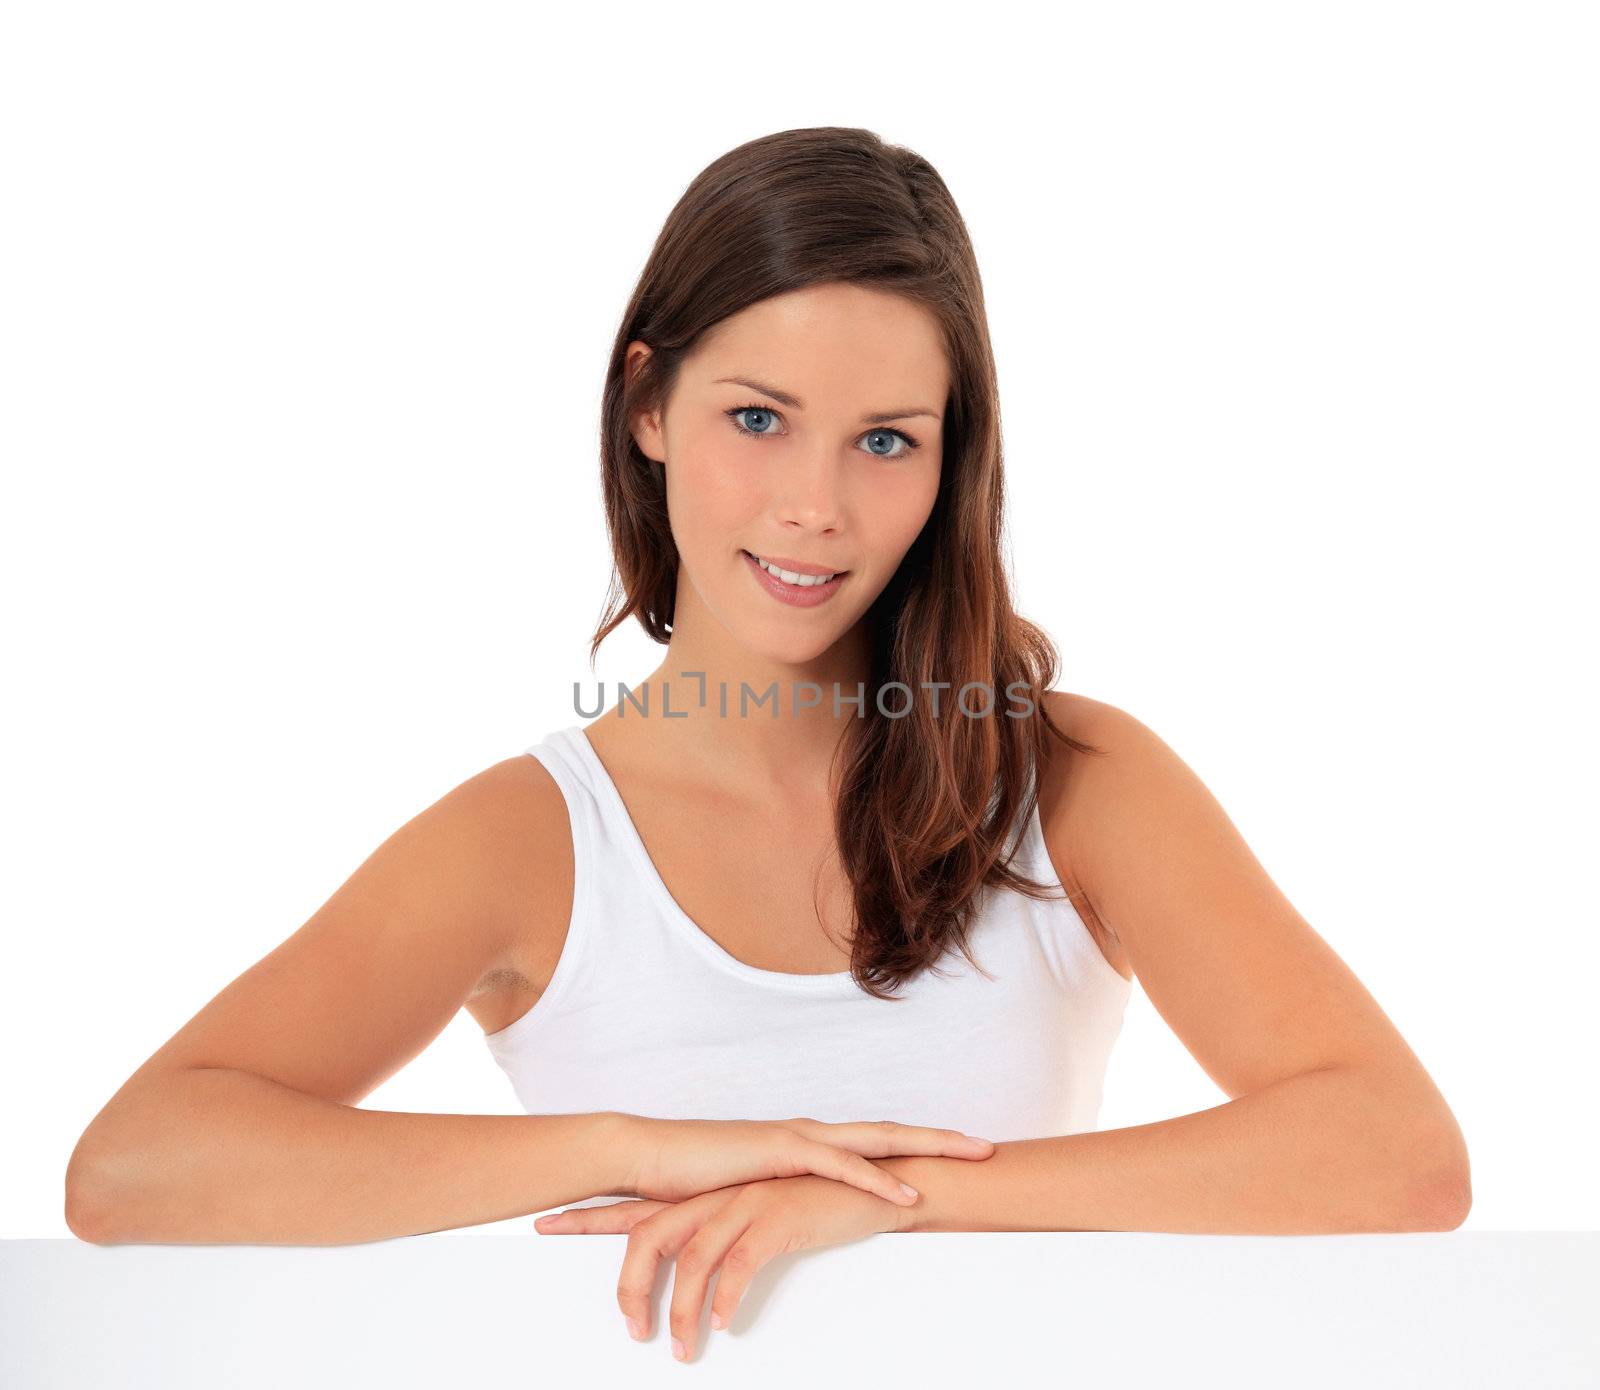 Attractive young woman standing behind blank white sign. All on white background.